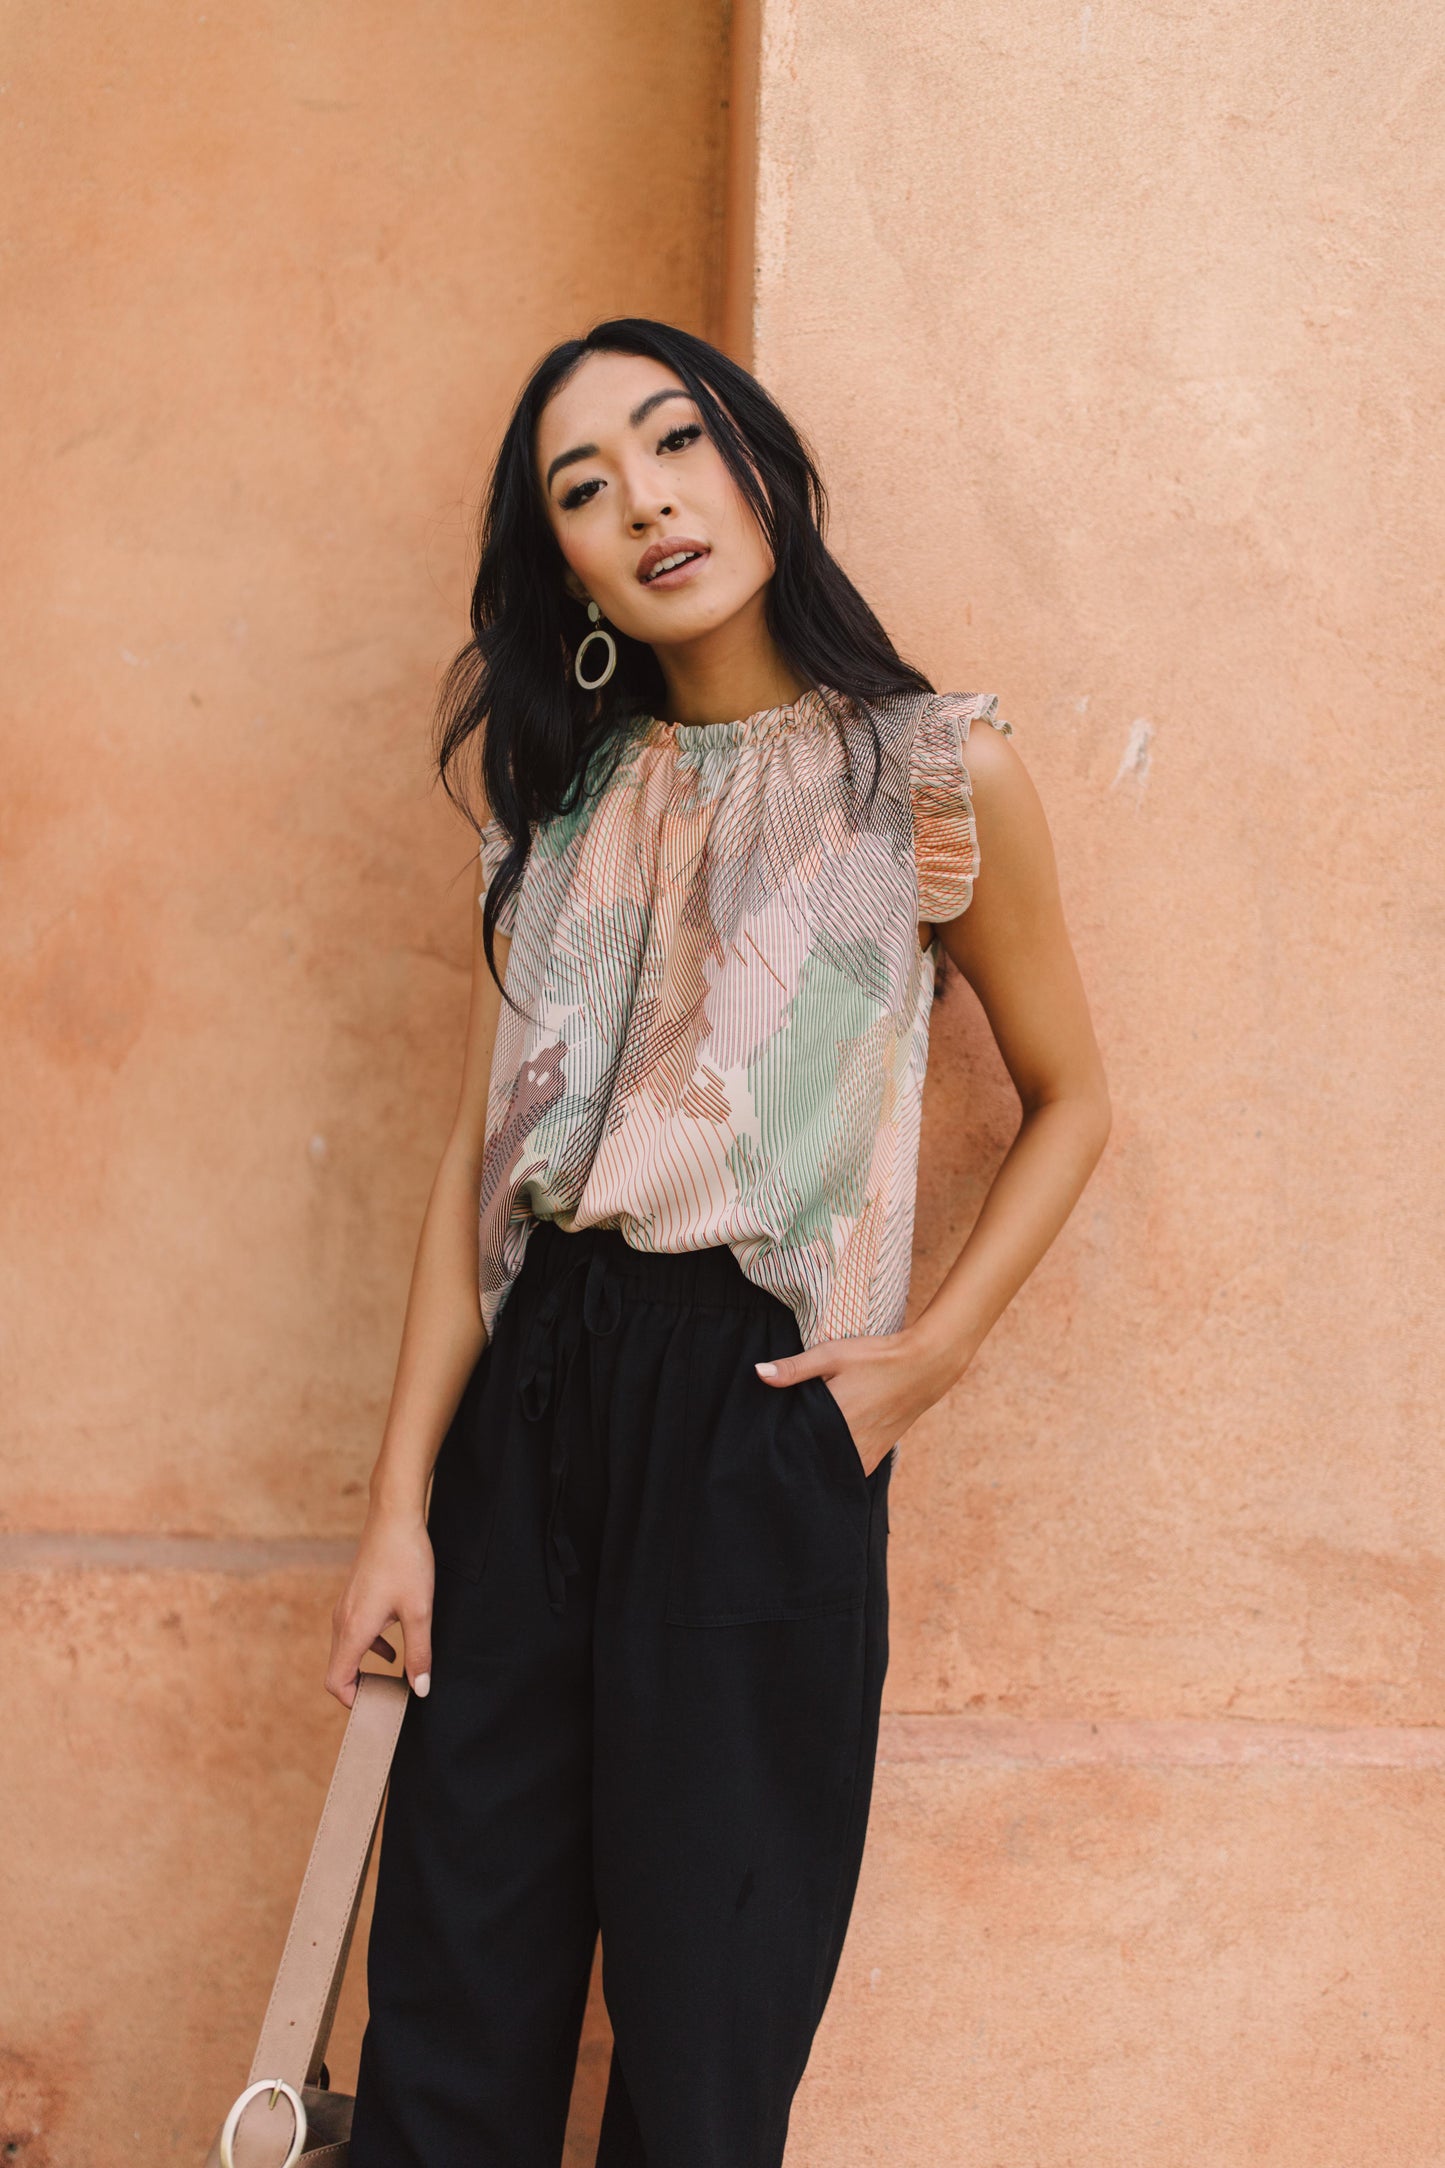 Abstract Floral Lineup Pastel Blouse